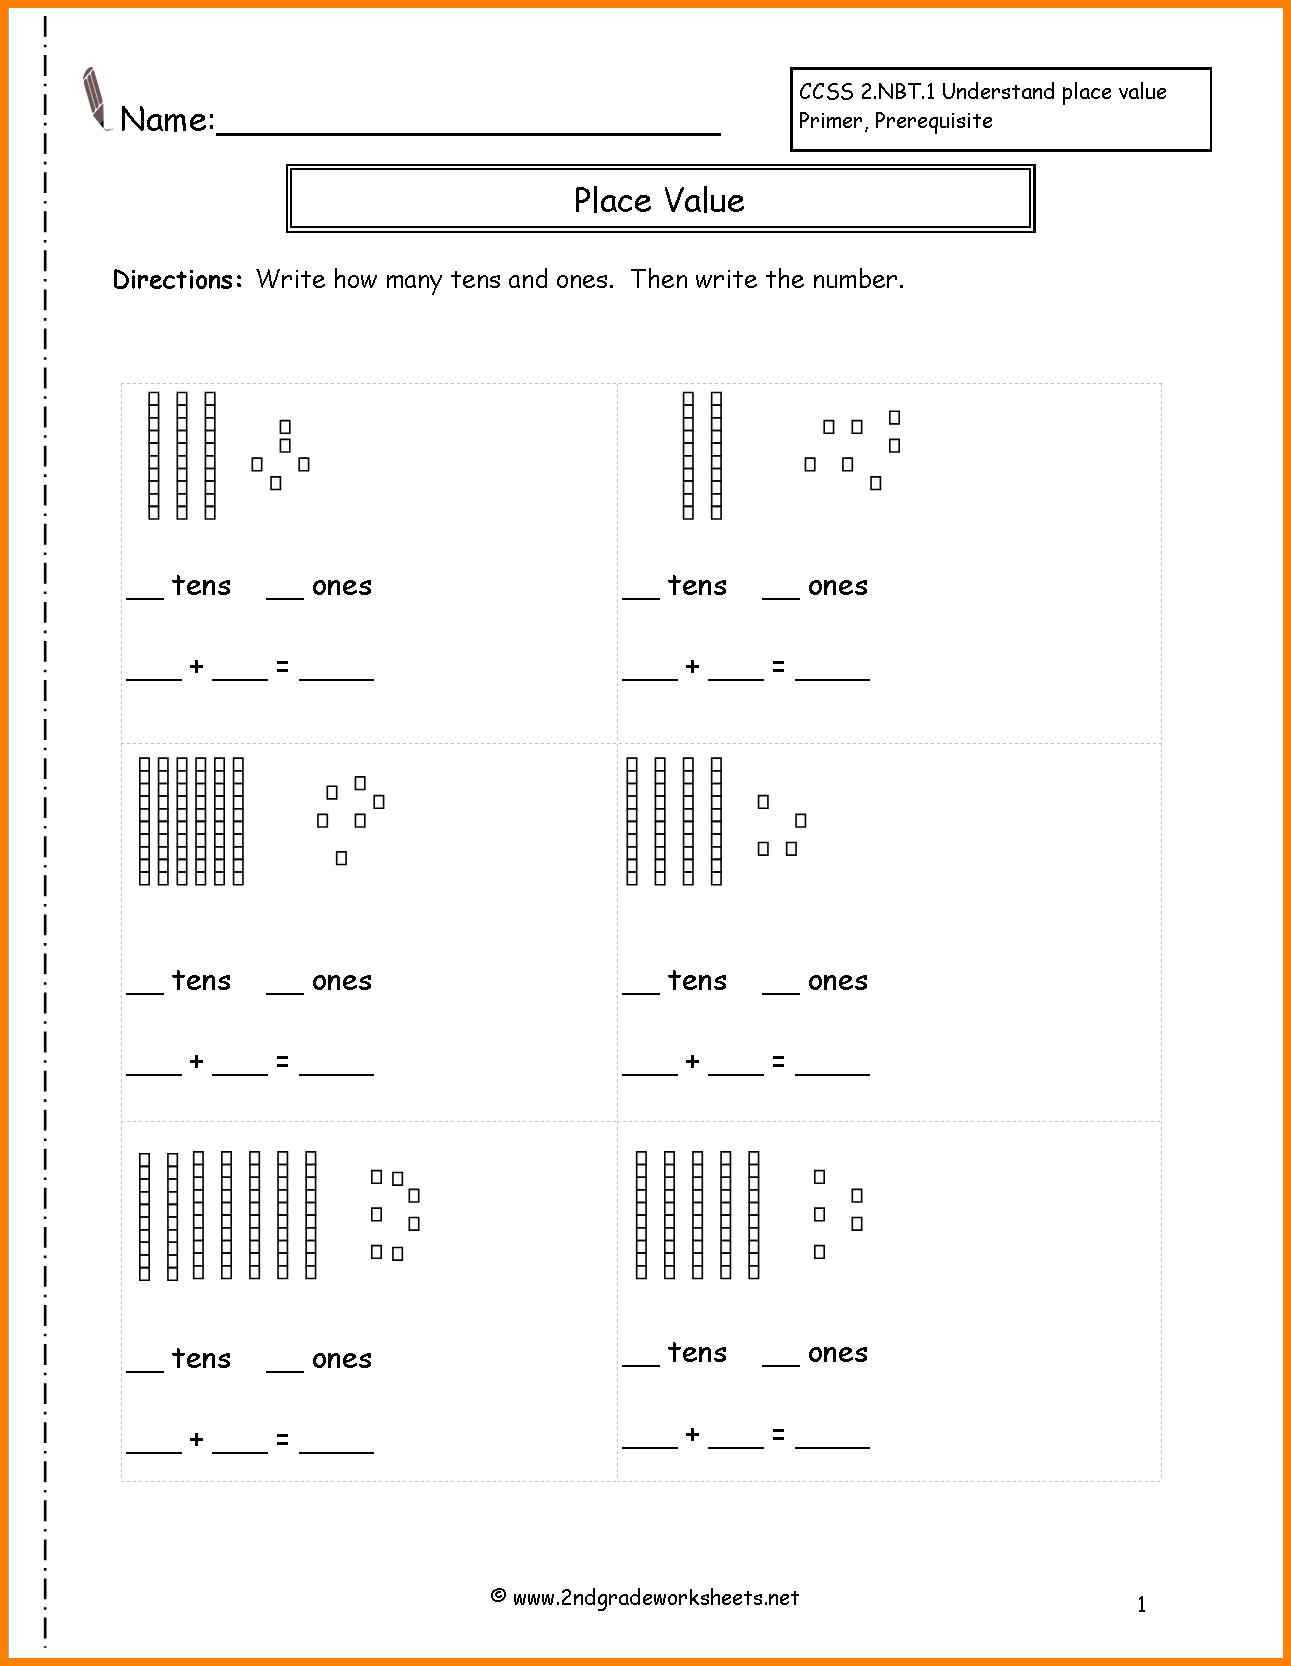 Spanish Reflexive Verbs Worksheet Pdf Along with Place Value Blocks Worksheets Placevalue7